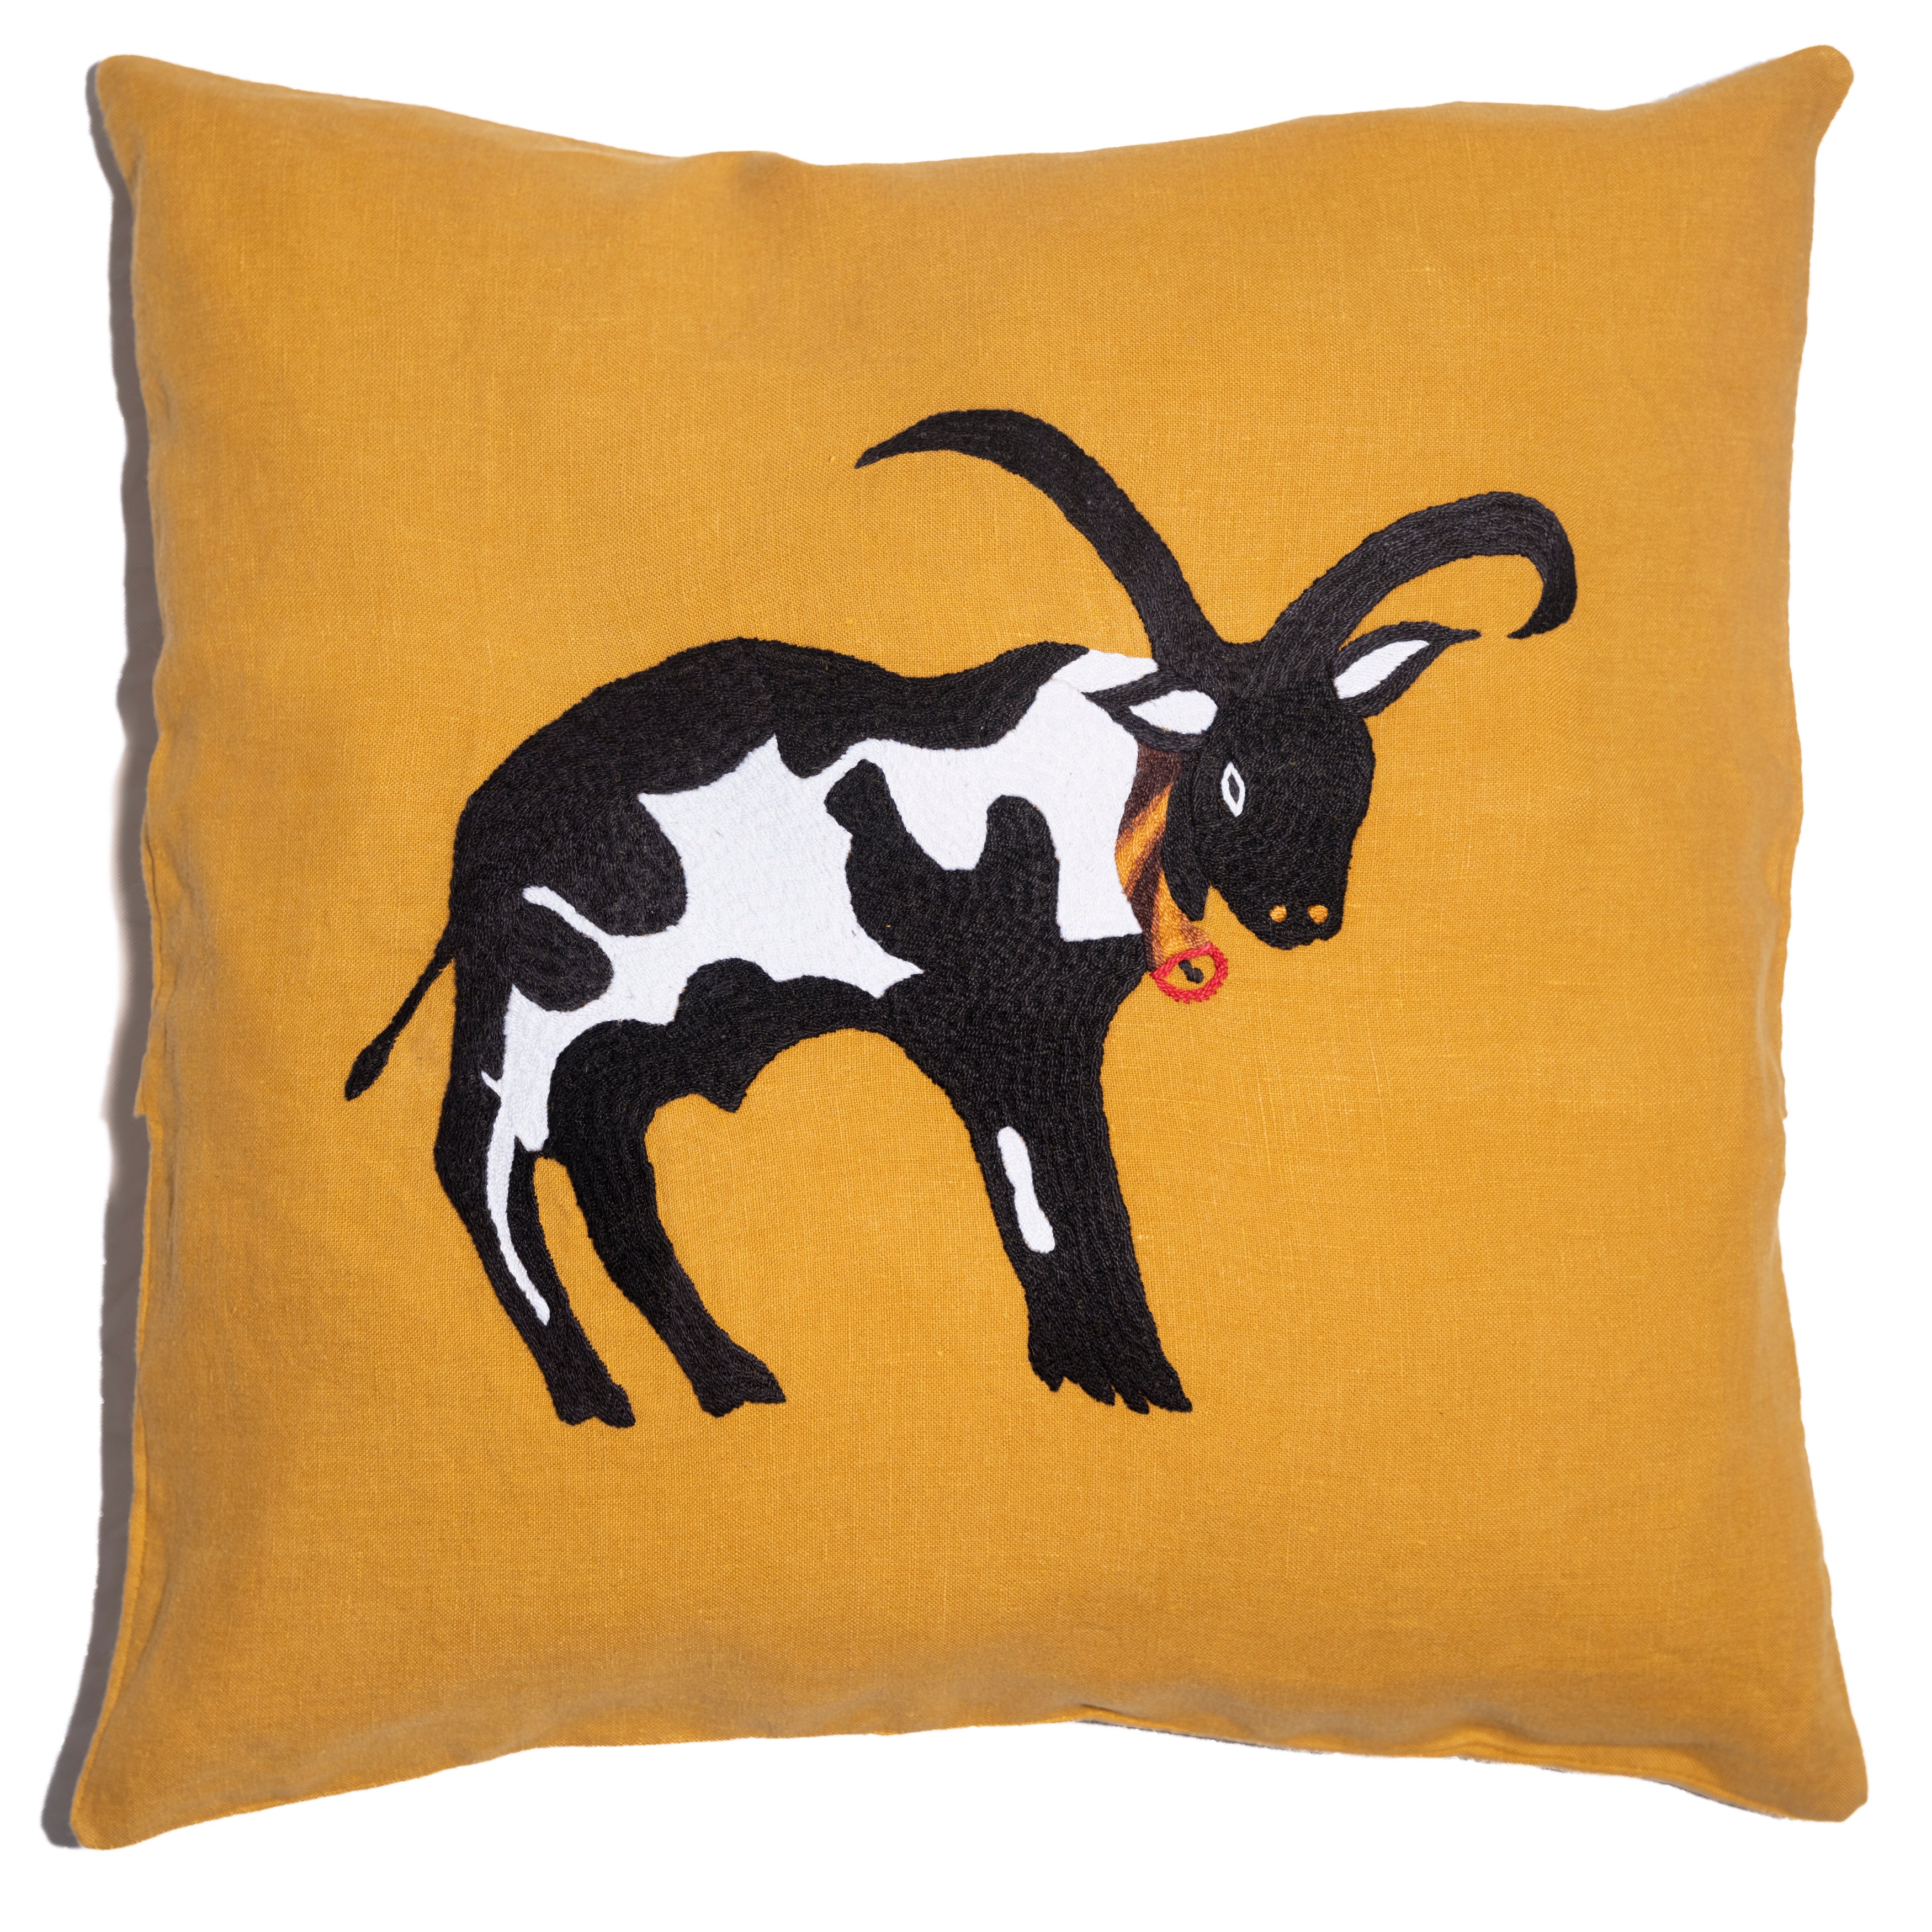 Cow pillow on yellow linen